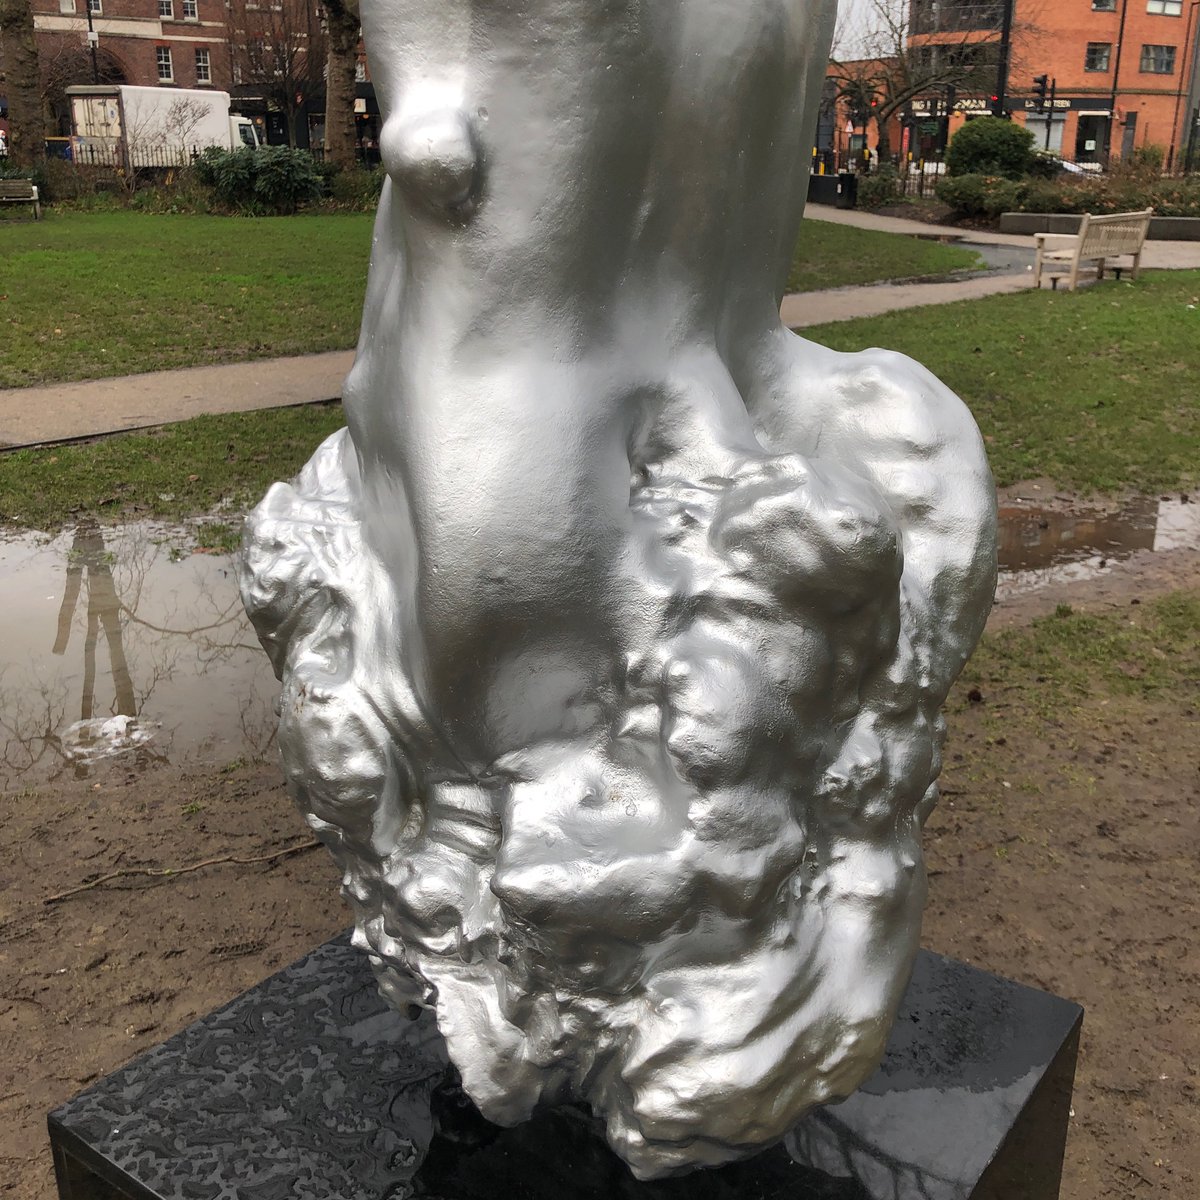 Finally made it to Newington Green to see the Wollstonecraft statue and I have some thoughts. What struck me most, quite aside from the content, was the poor quality of the finish. I didn’t understand the silver in reproduction, but even less in actuality...